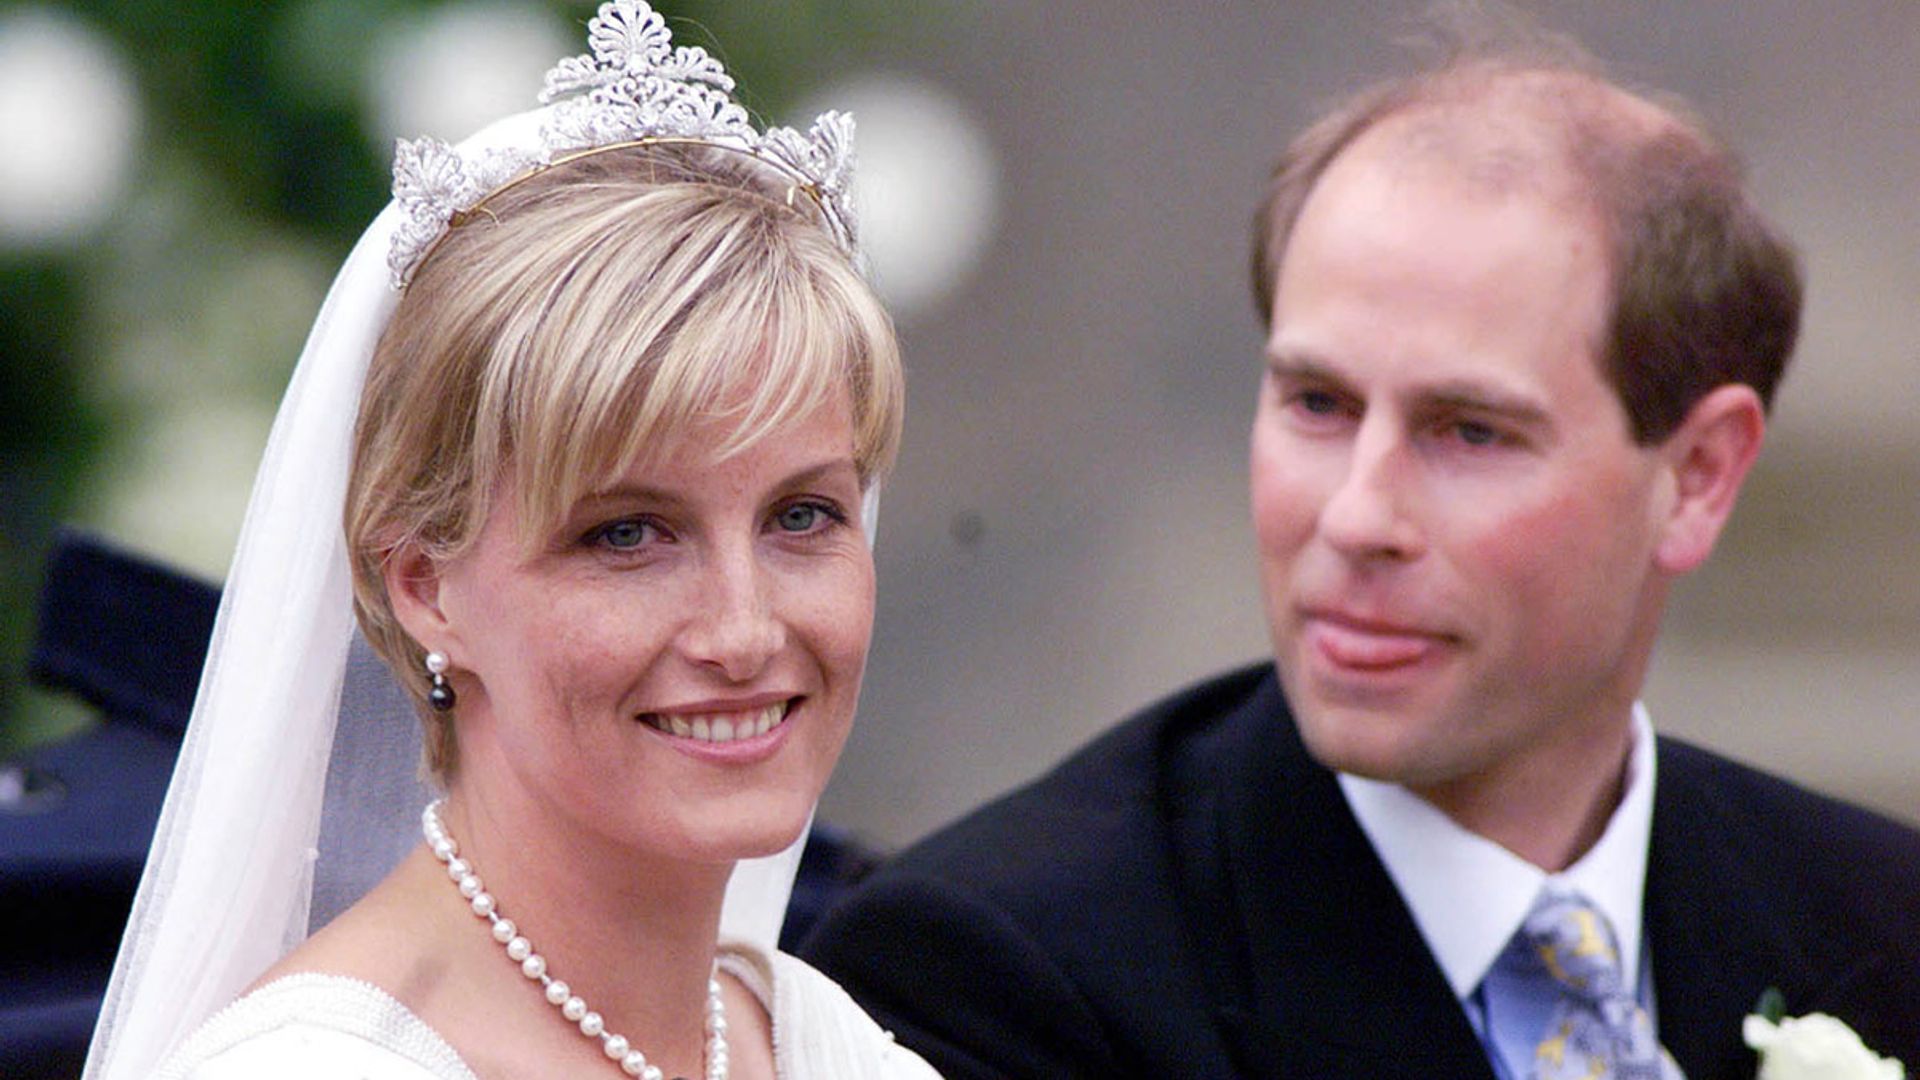 Countess Sophie's pearl-encrusted wedding dress was wildly different from other royals